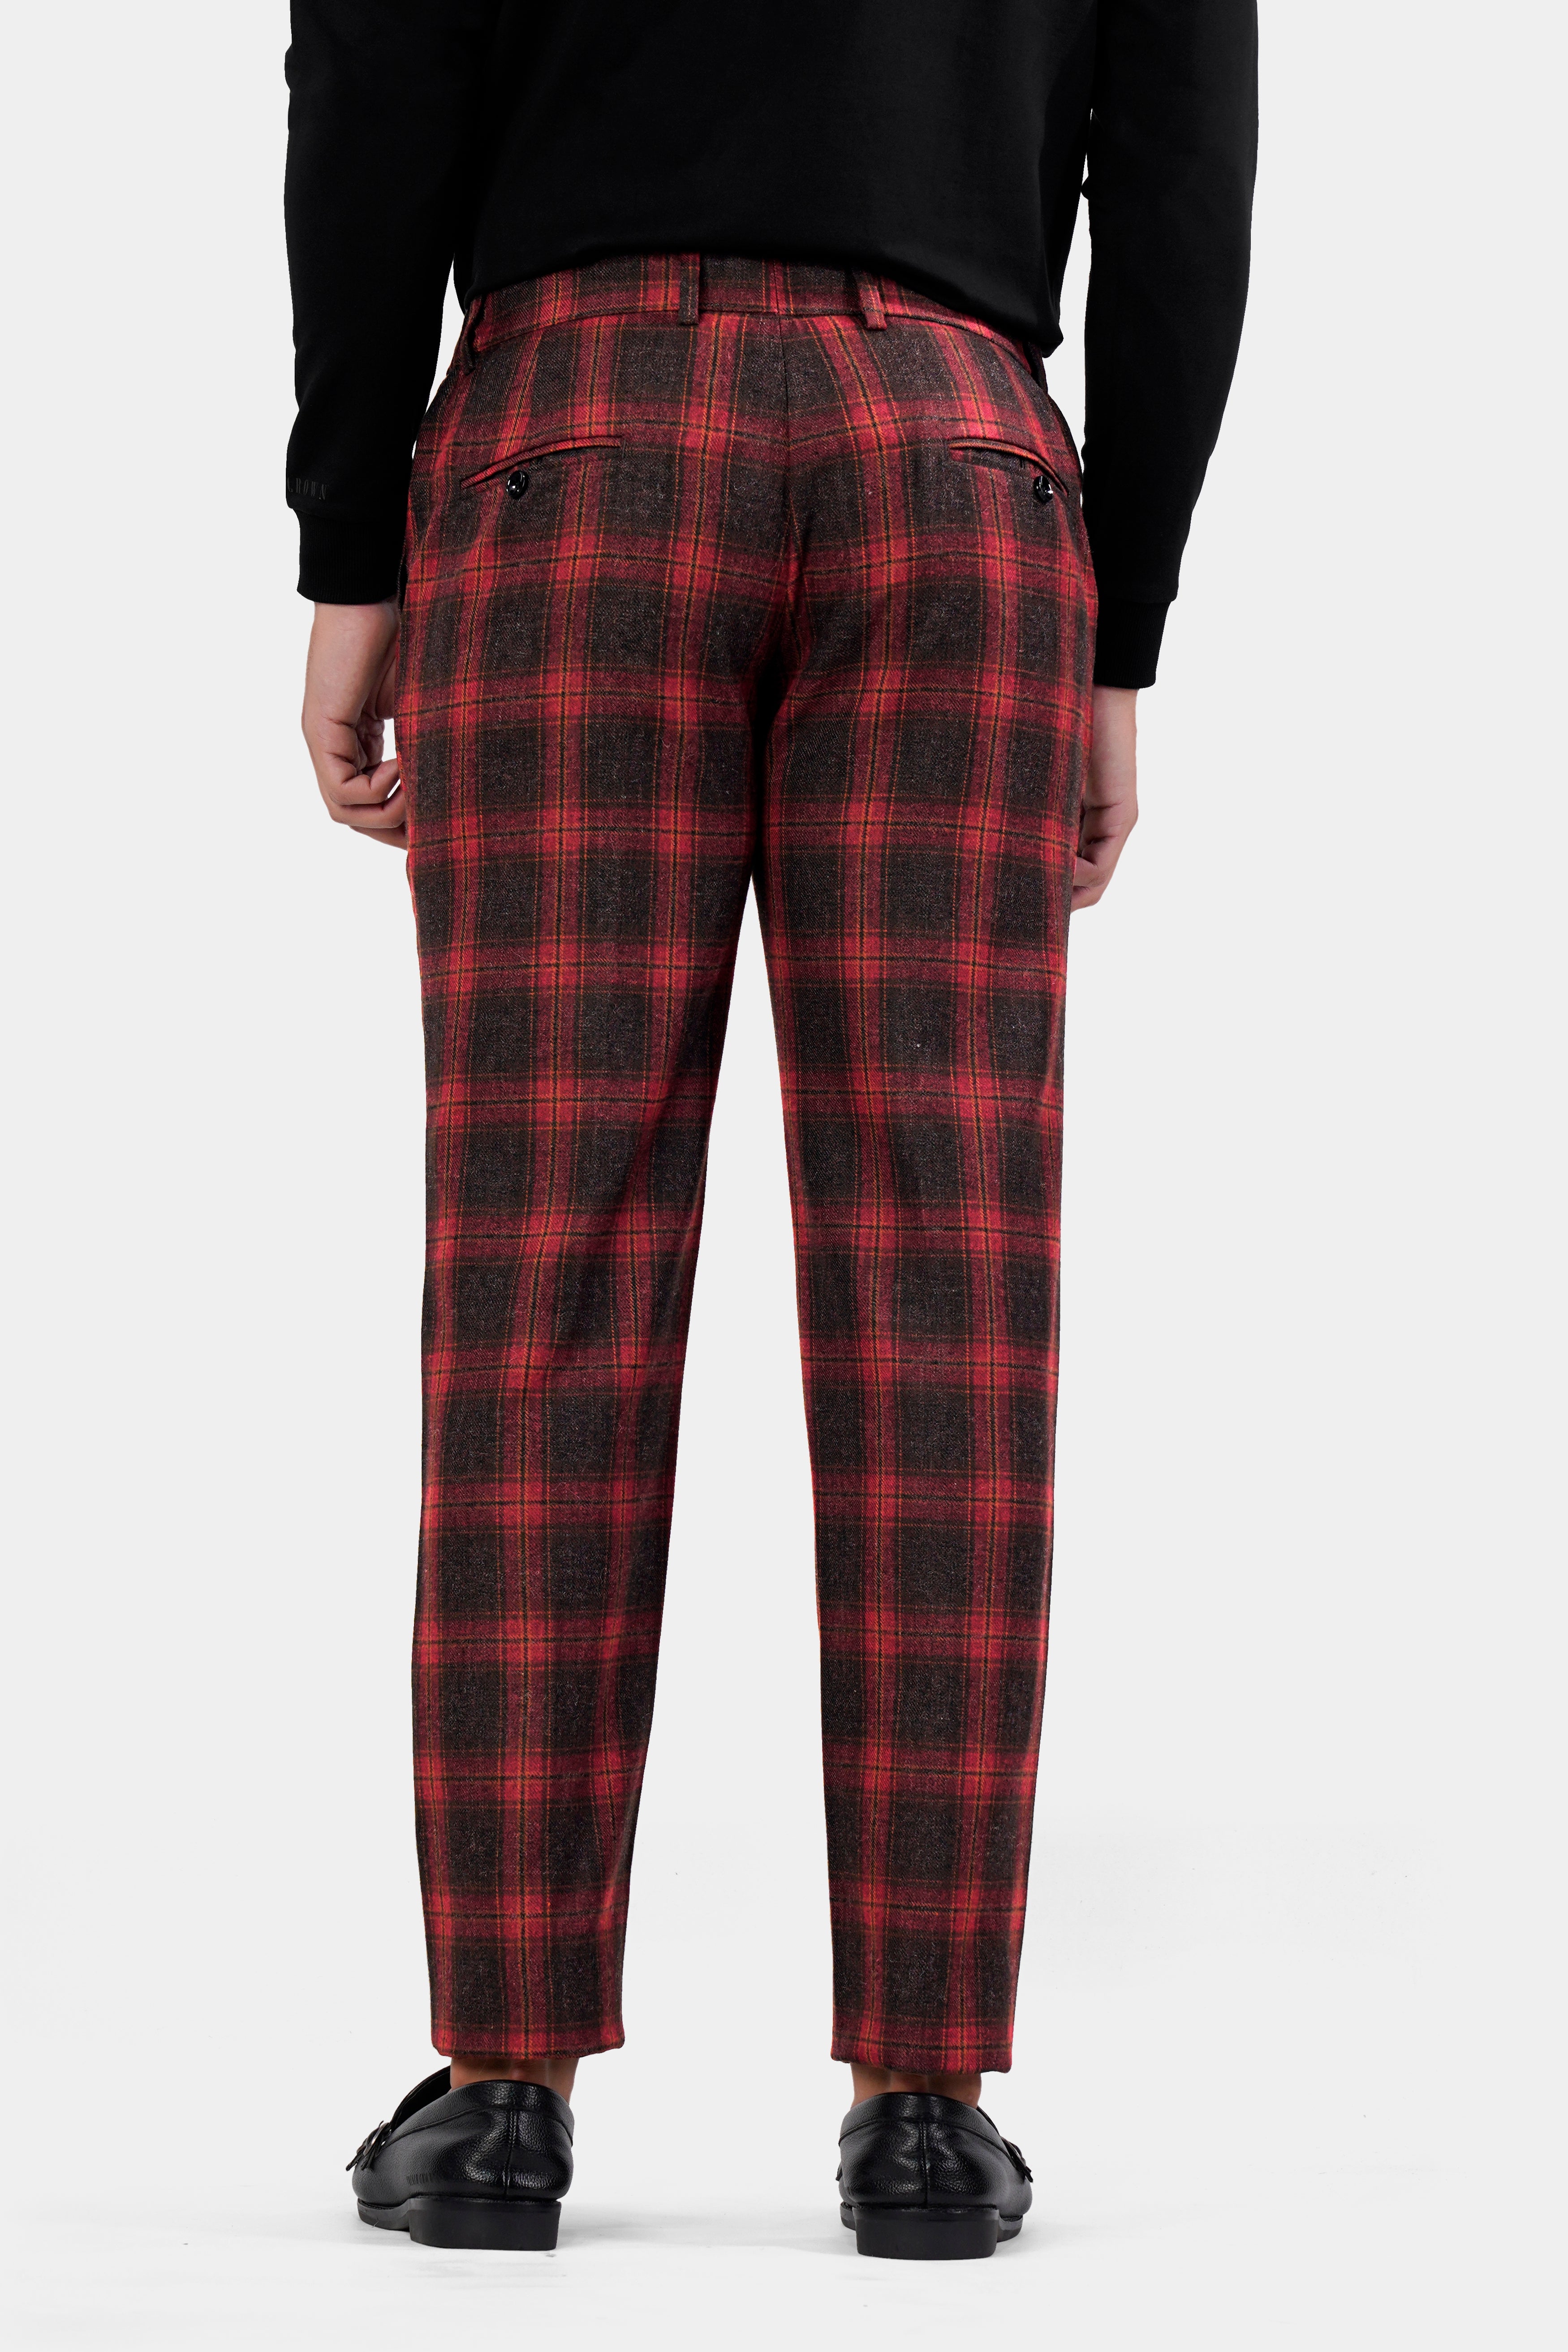 Red and Black Plaid Pants